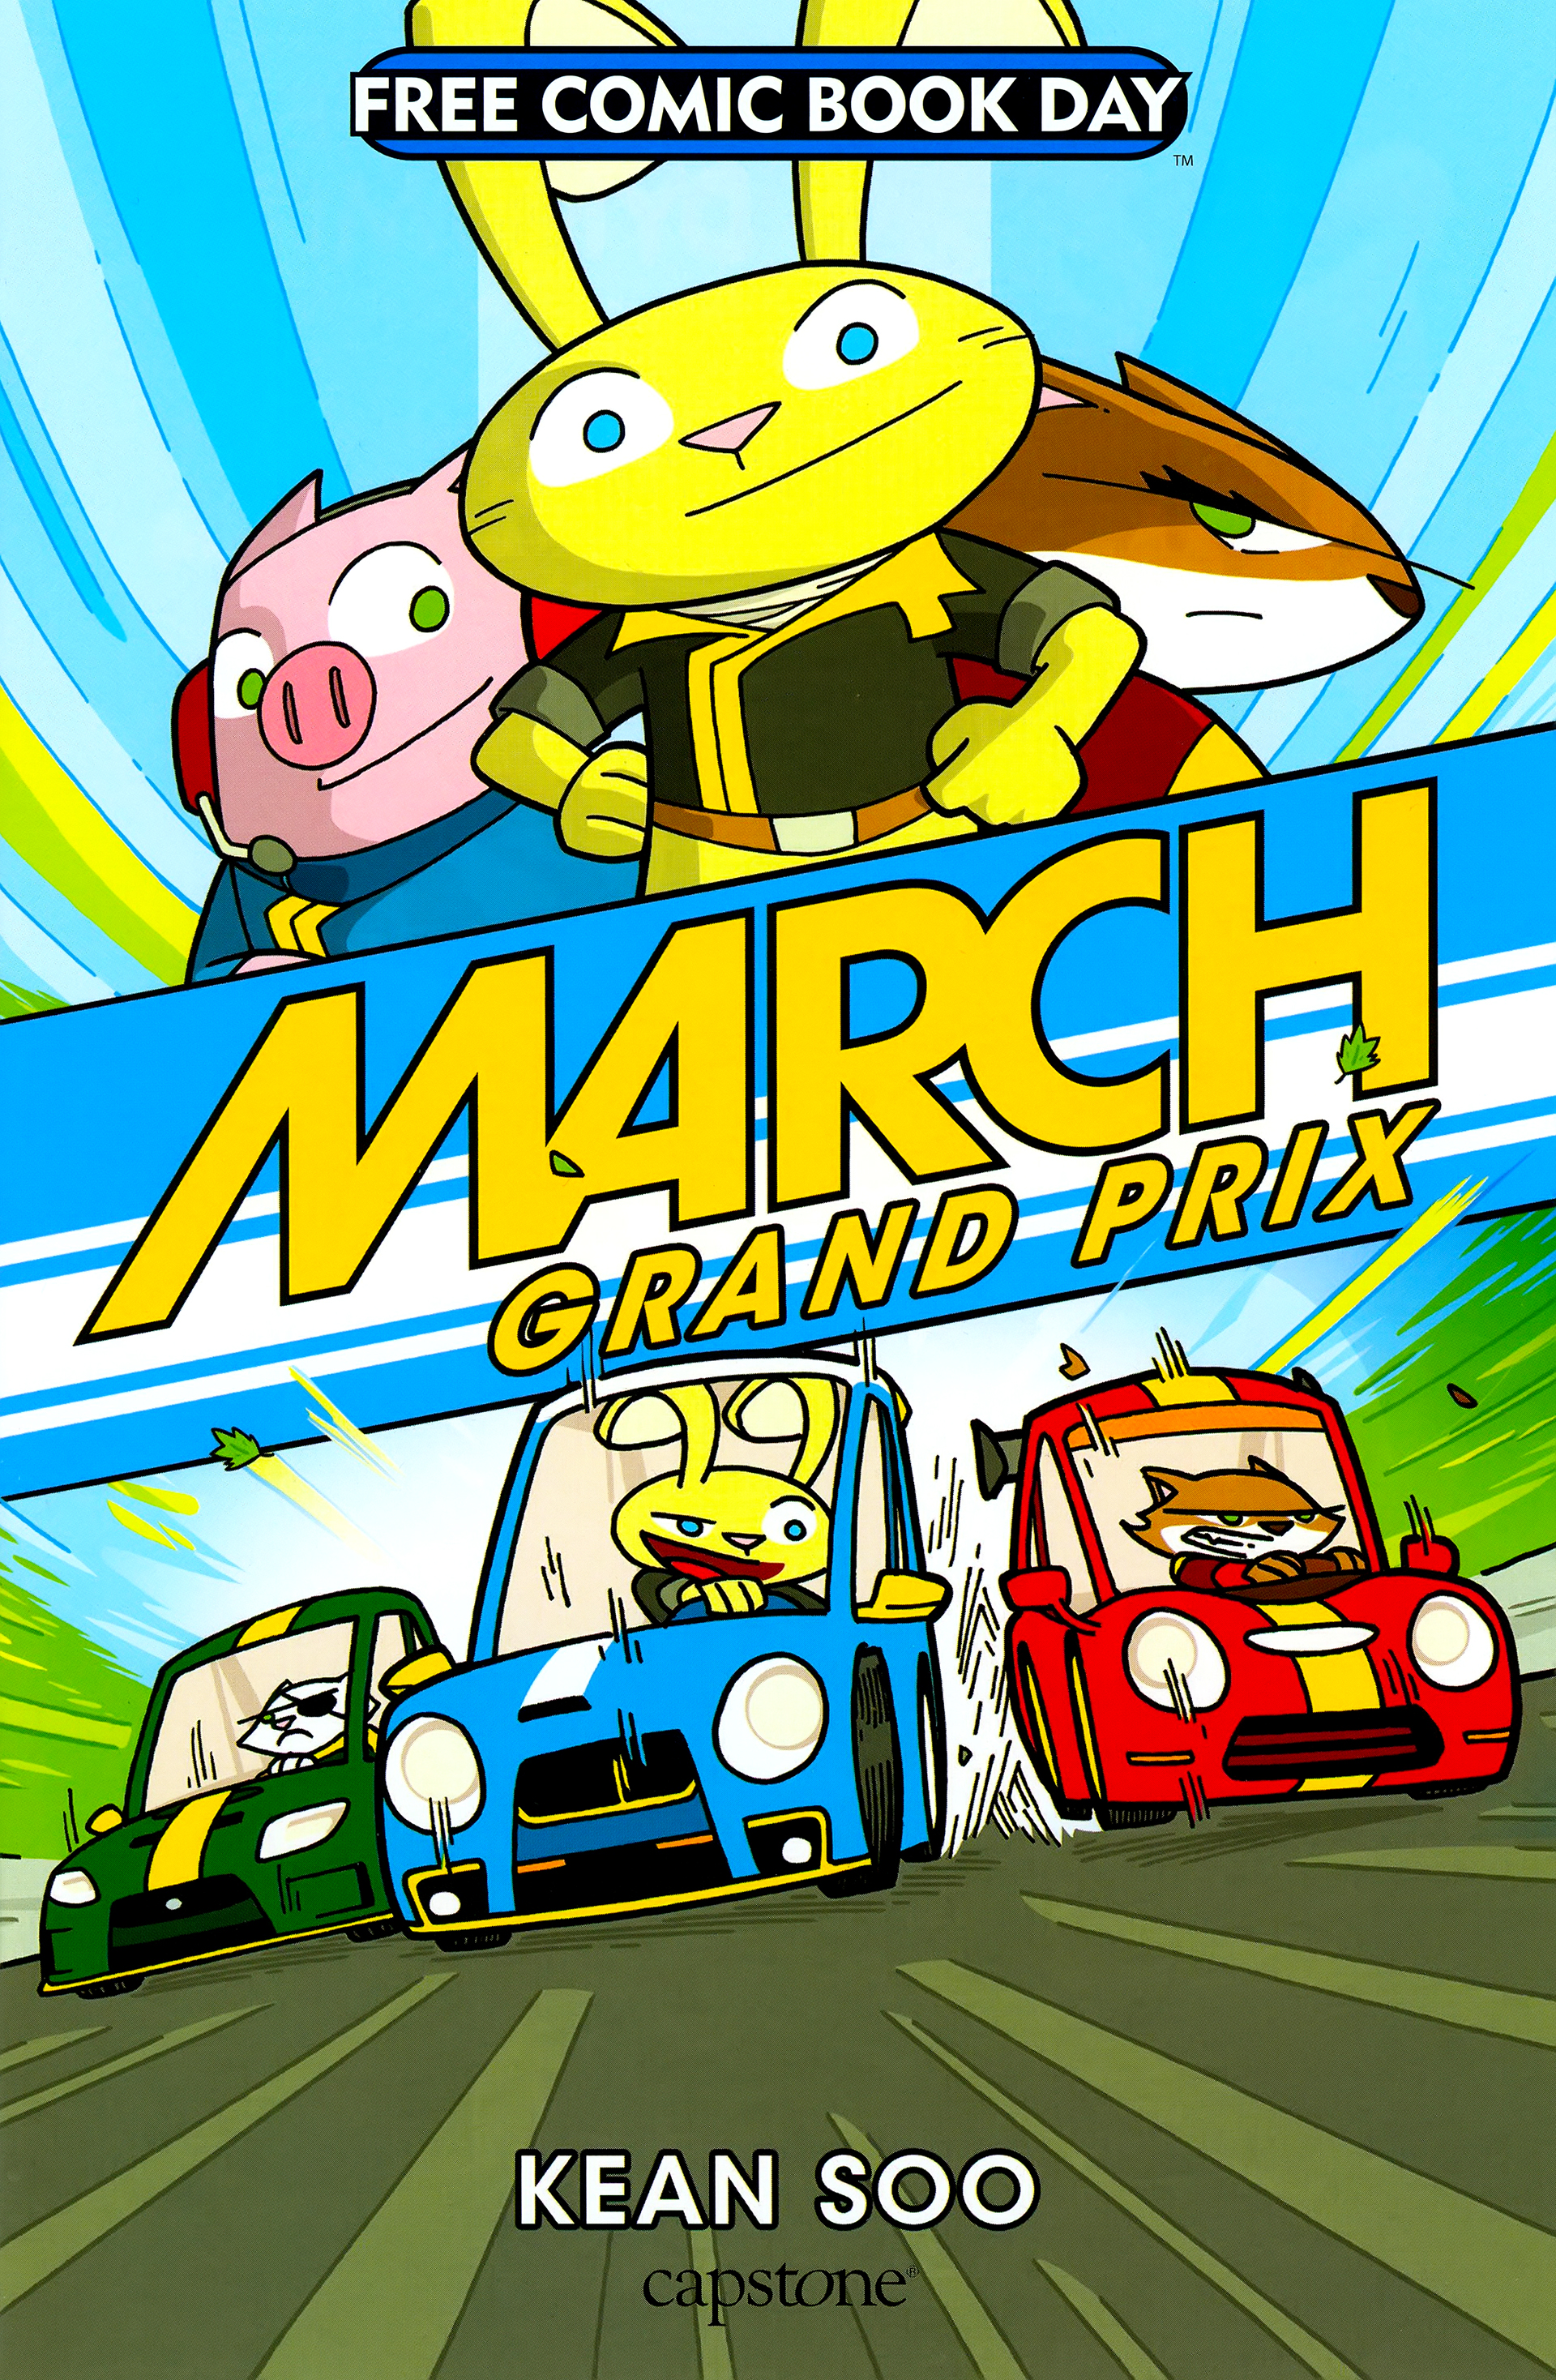 Read online Free Comic Book Day 2015 comic -  Issue # March Grand Prix - 1